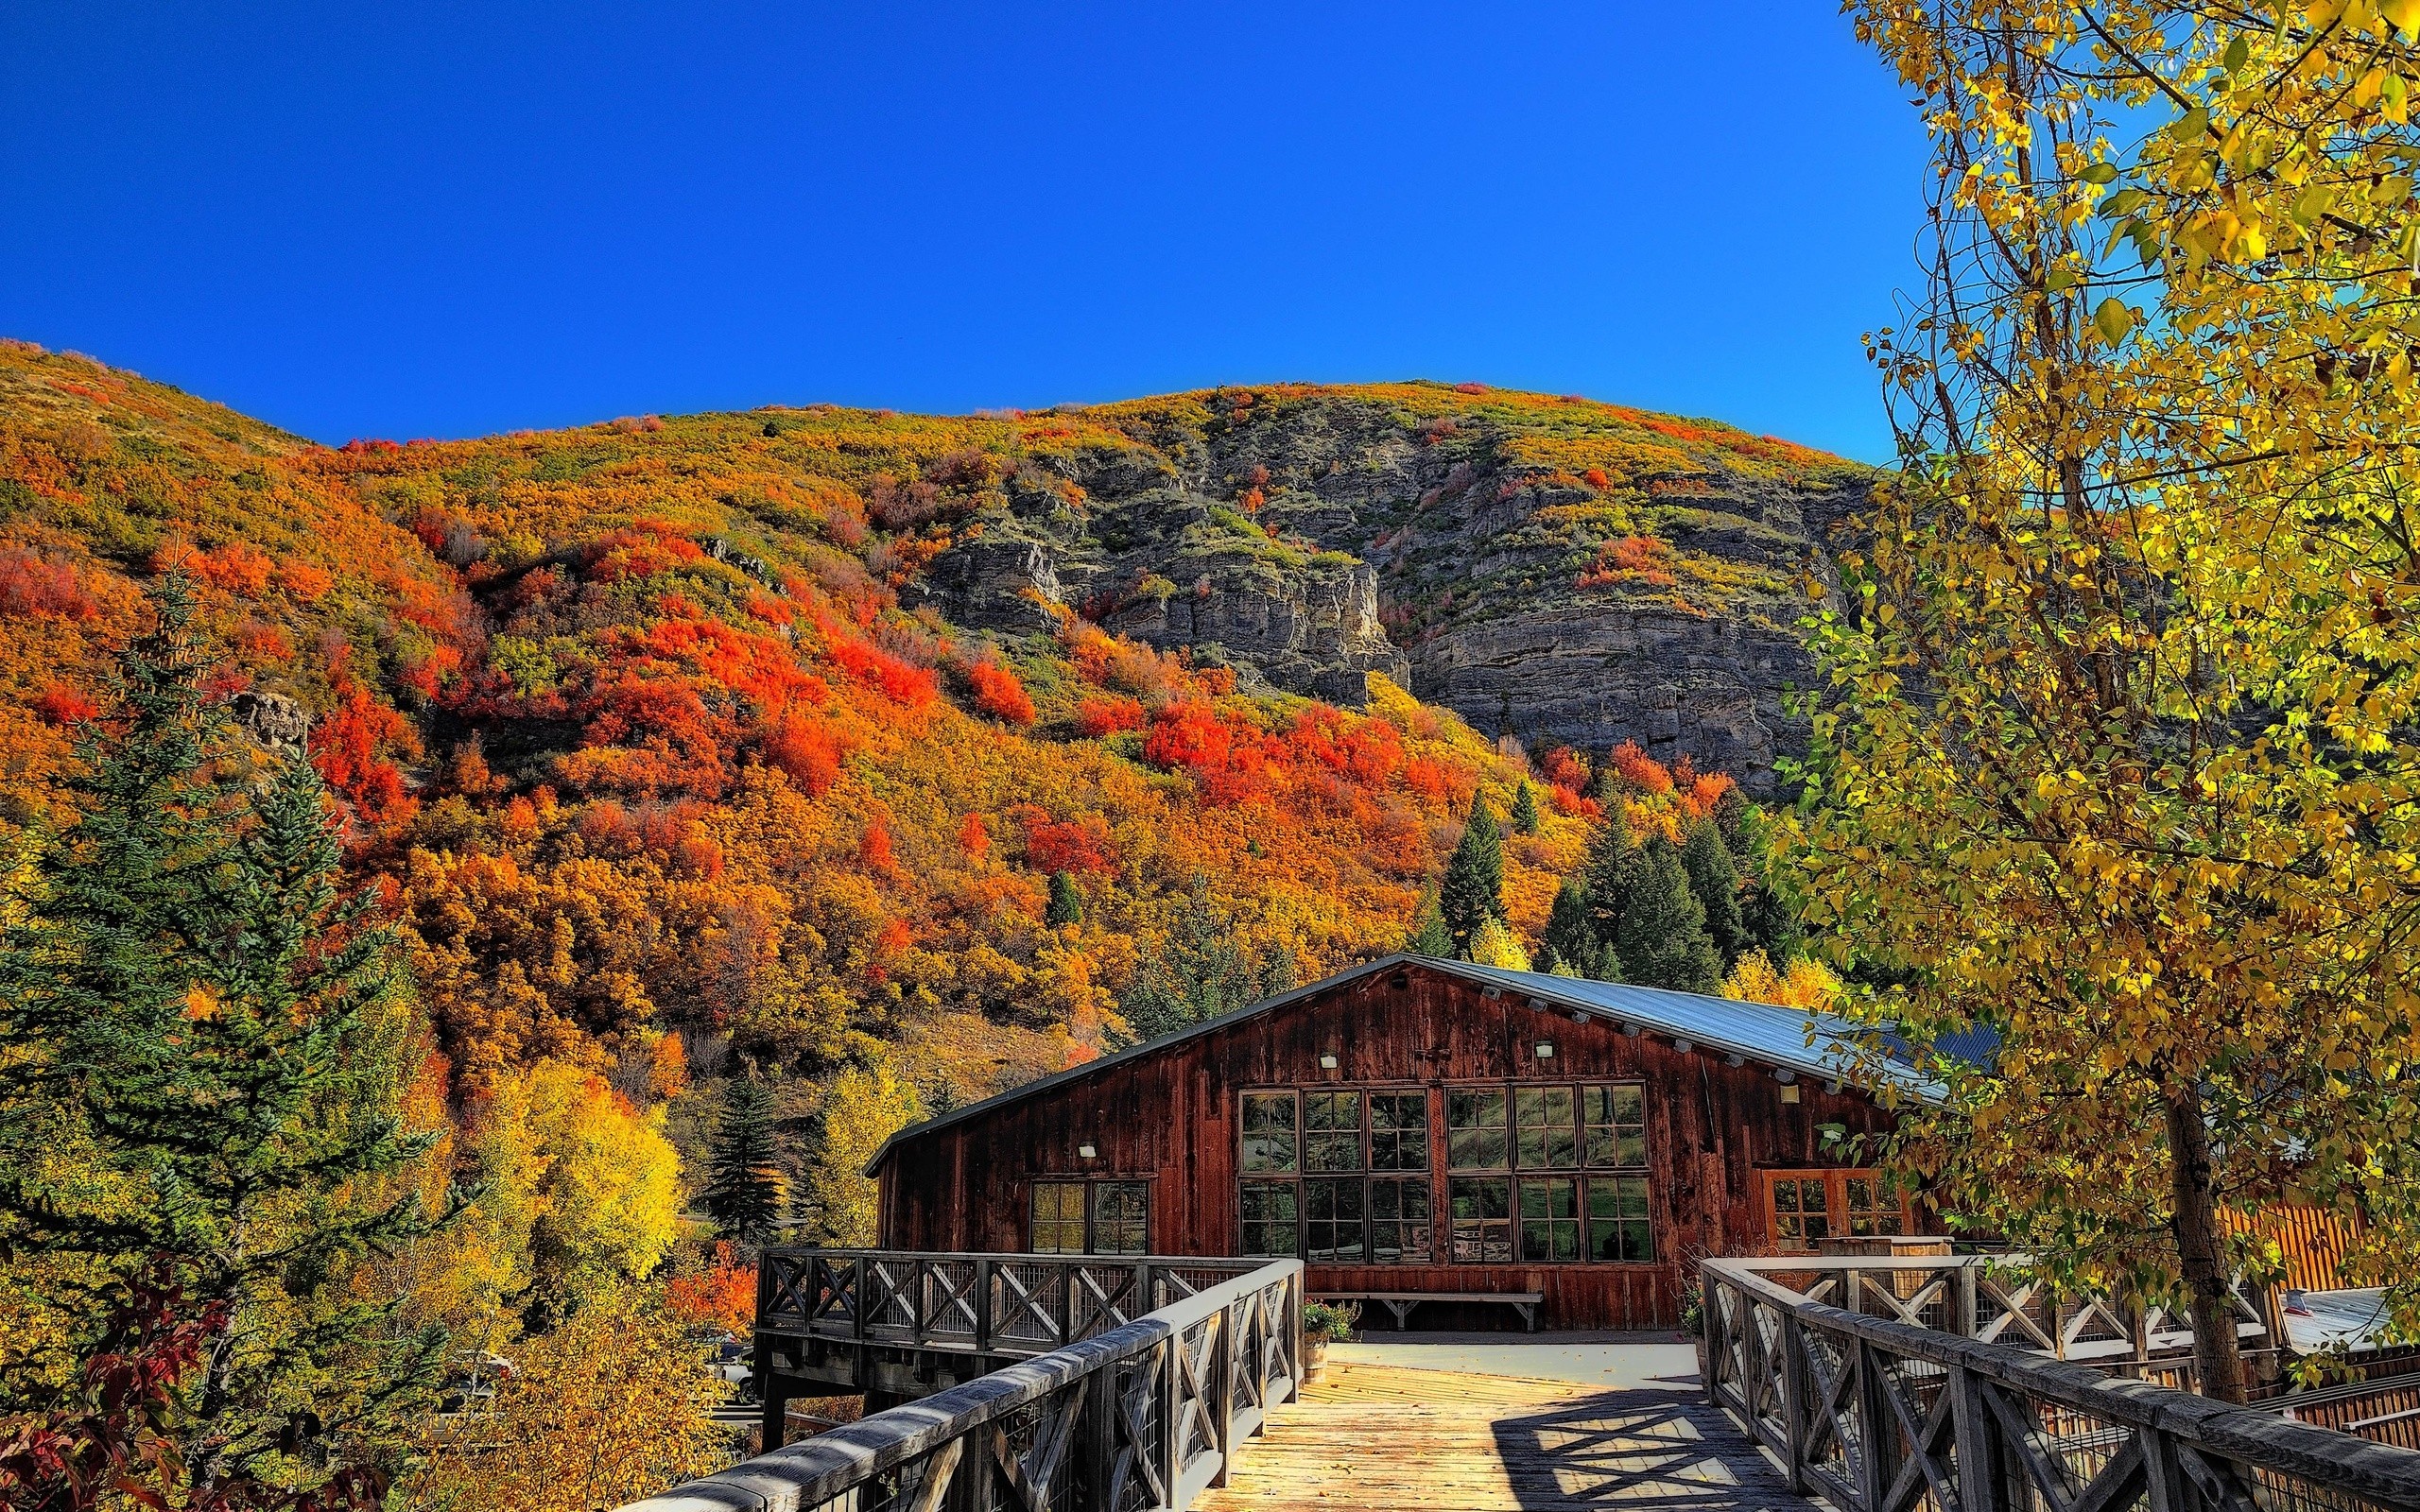 General 2560x1600 fall mountains wood house landscape red leaves nature cabin